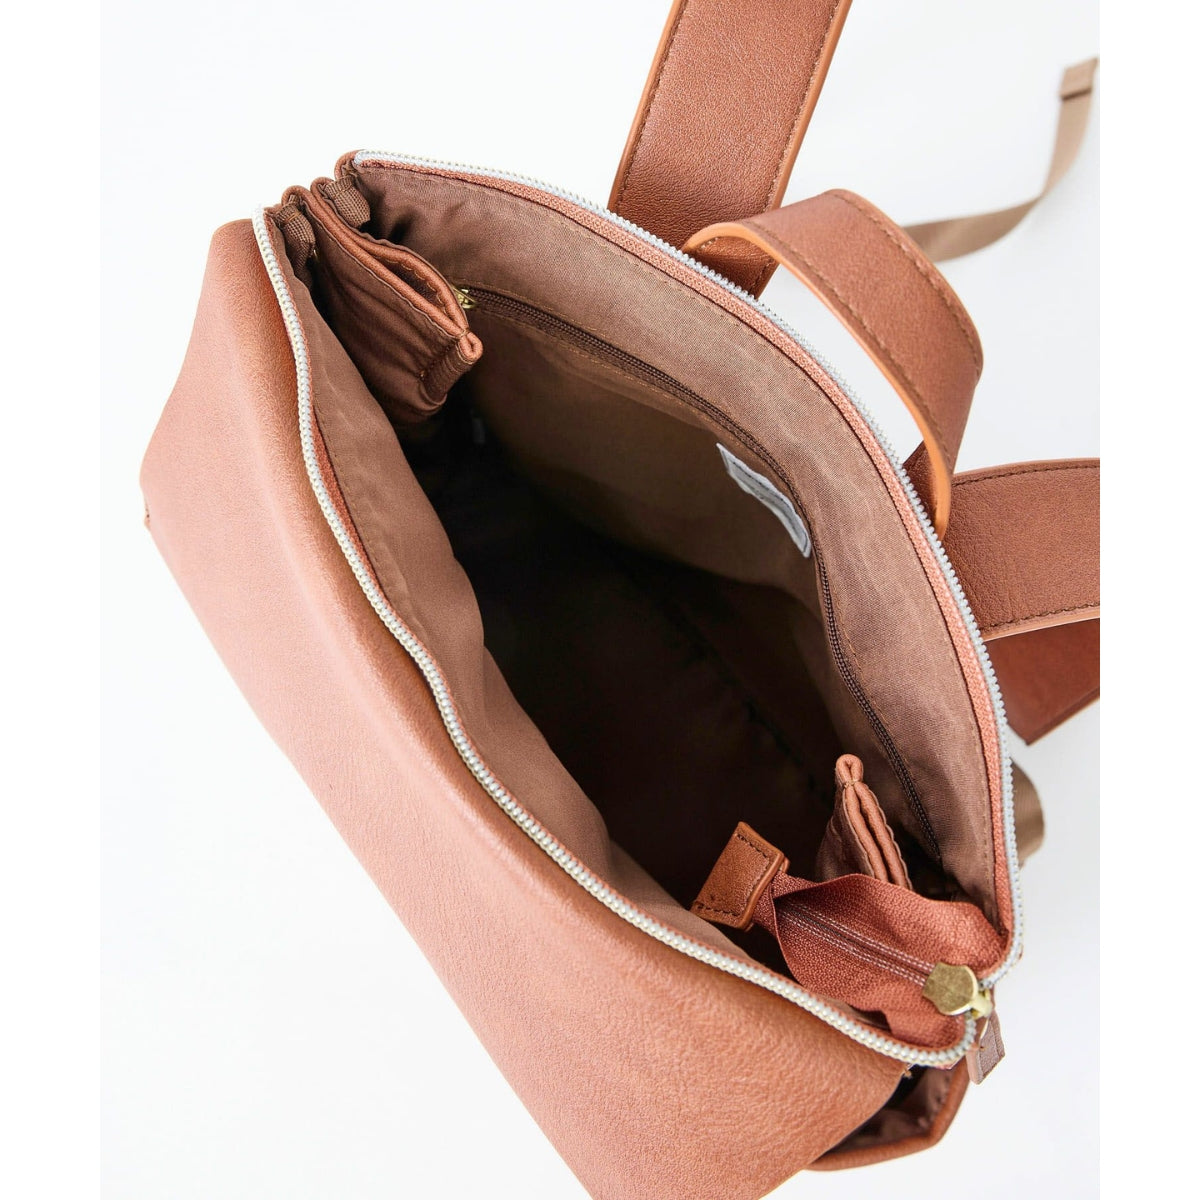 Anello Legato Neo Backpack in Camel